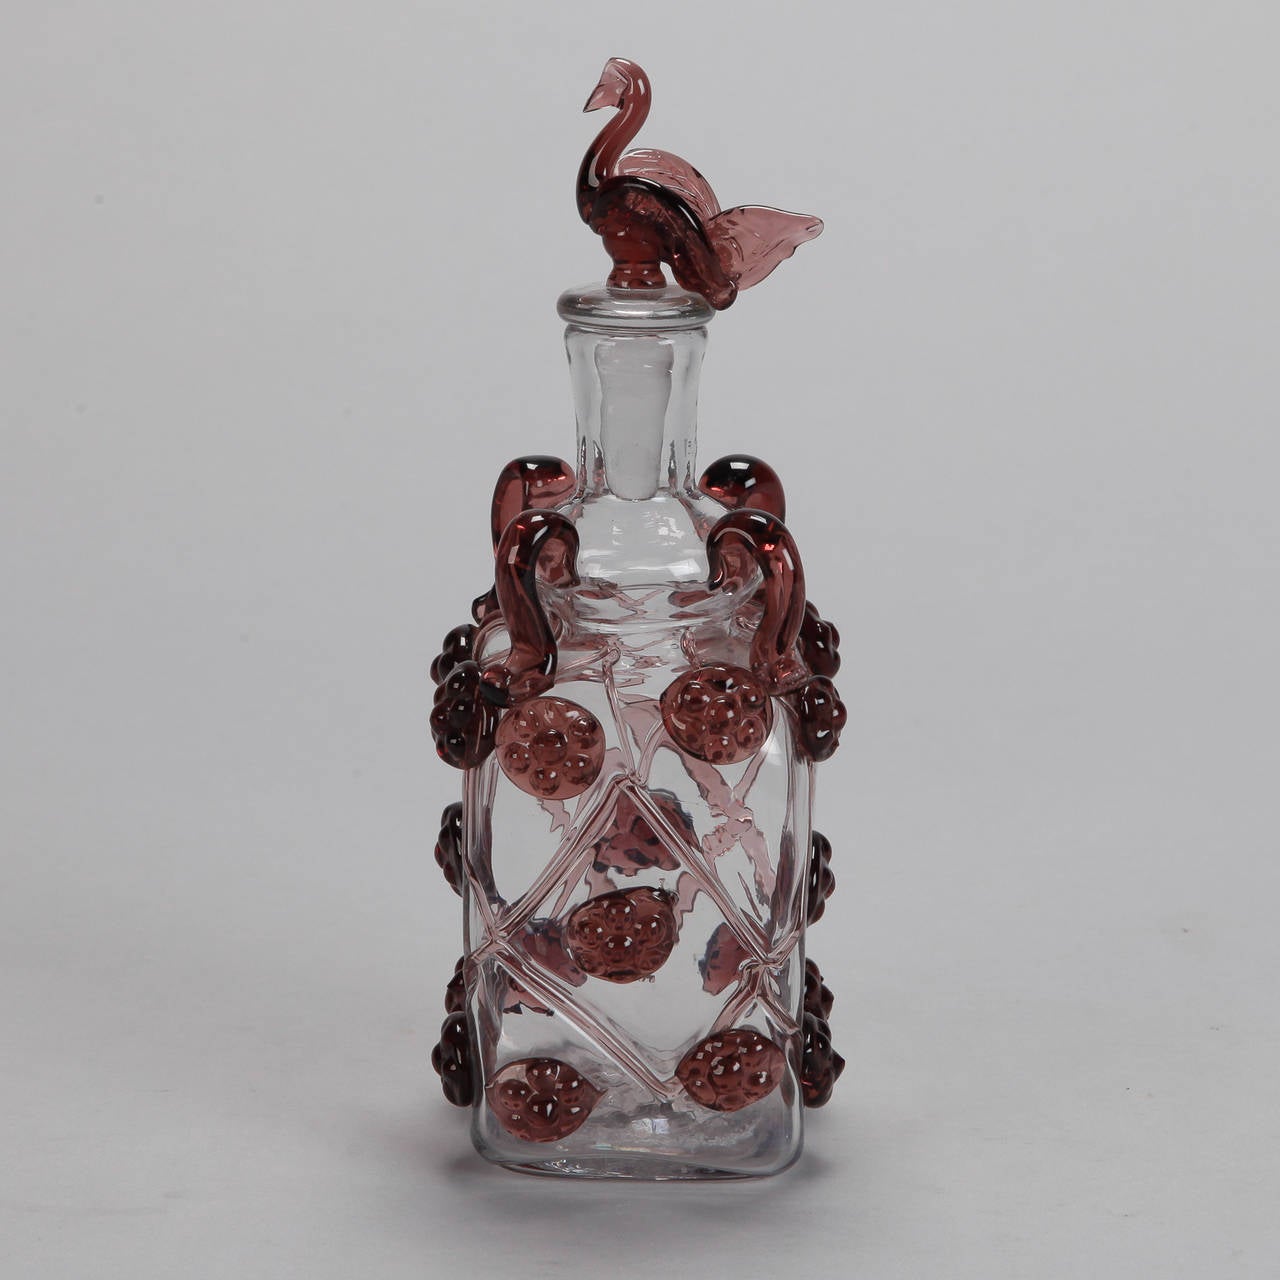 Circa 1950s clear glass decanter with plum colored applied glass decorations. Stopper has a bird form top.